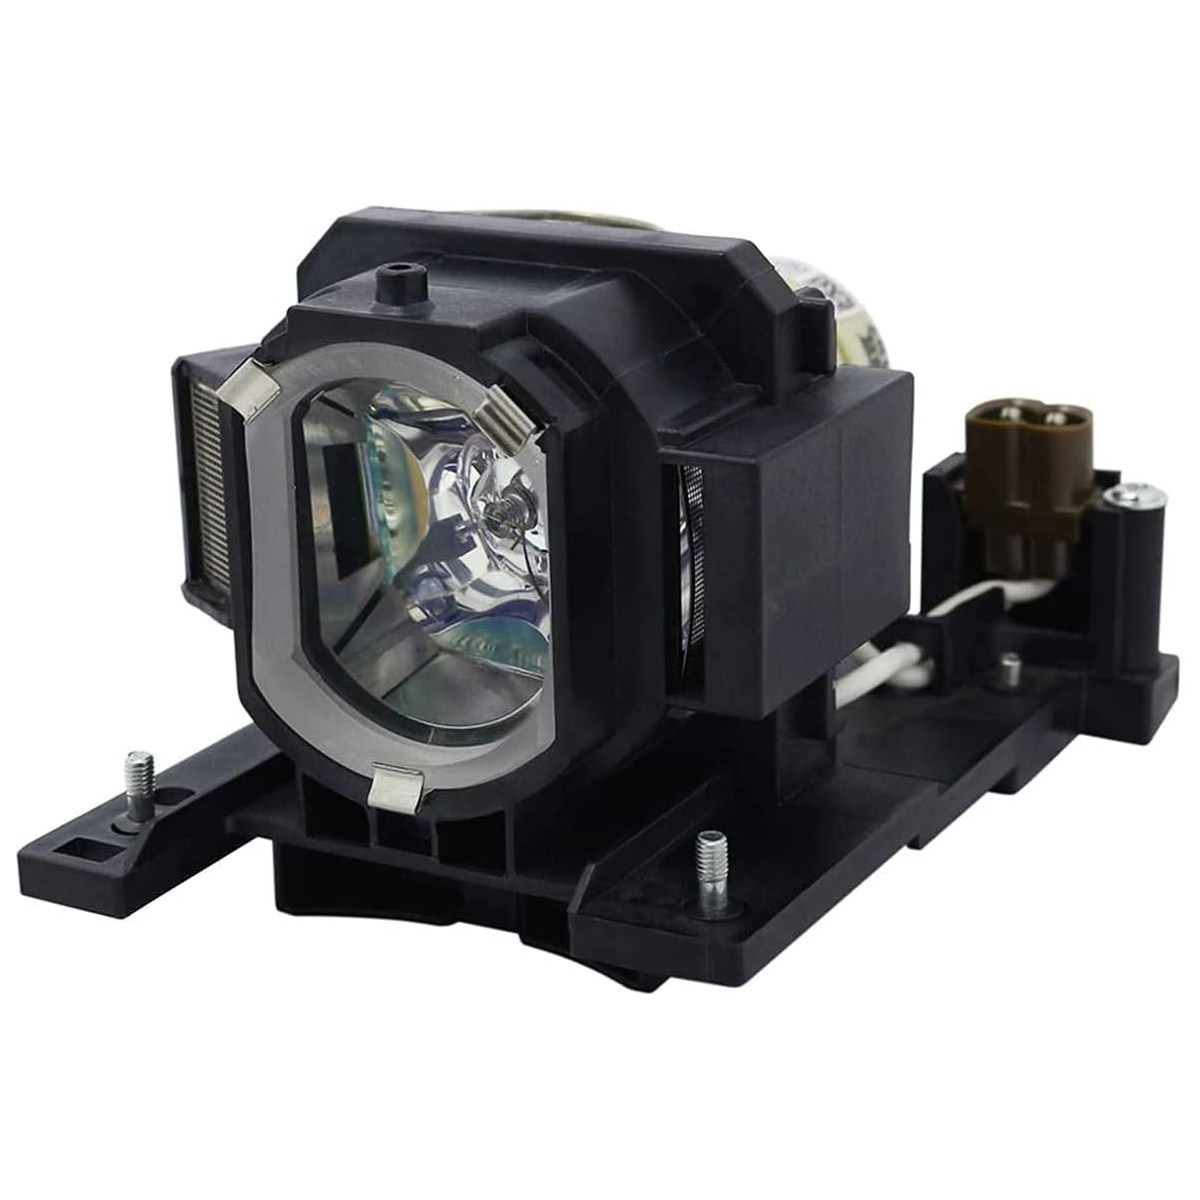 Replacement Projector lamp DT01026 For Hitachi CP-RX78 CP -RX78W CP-RX80W